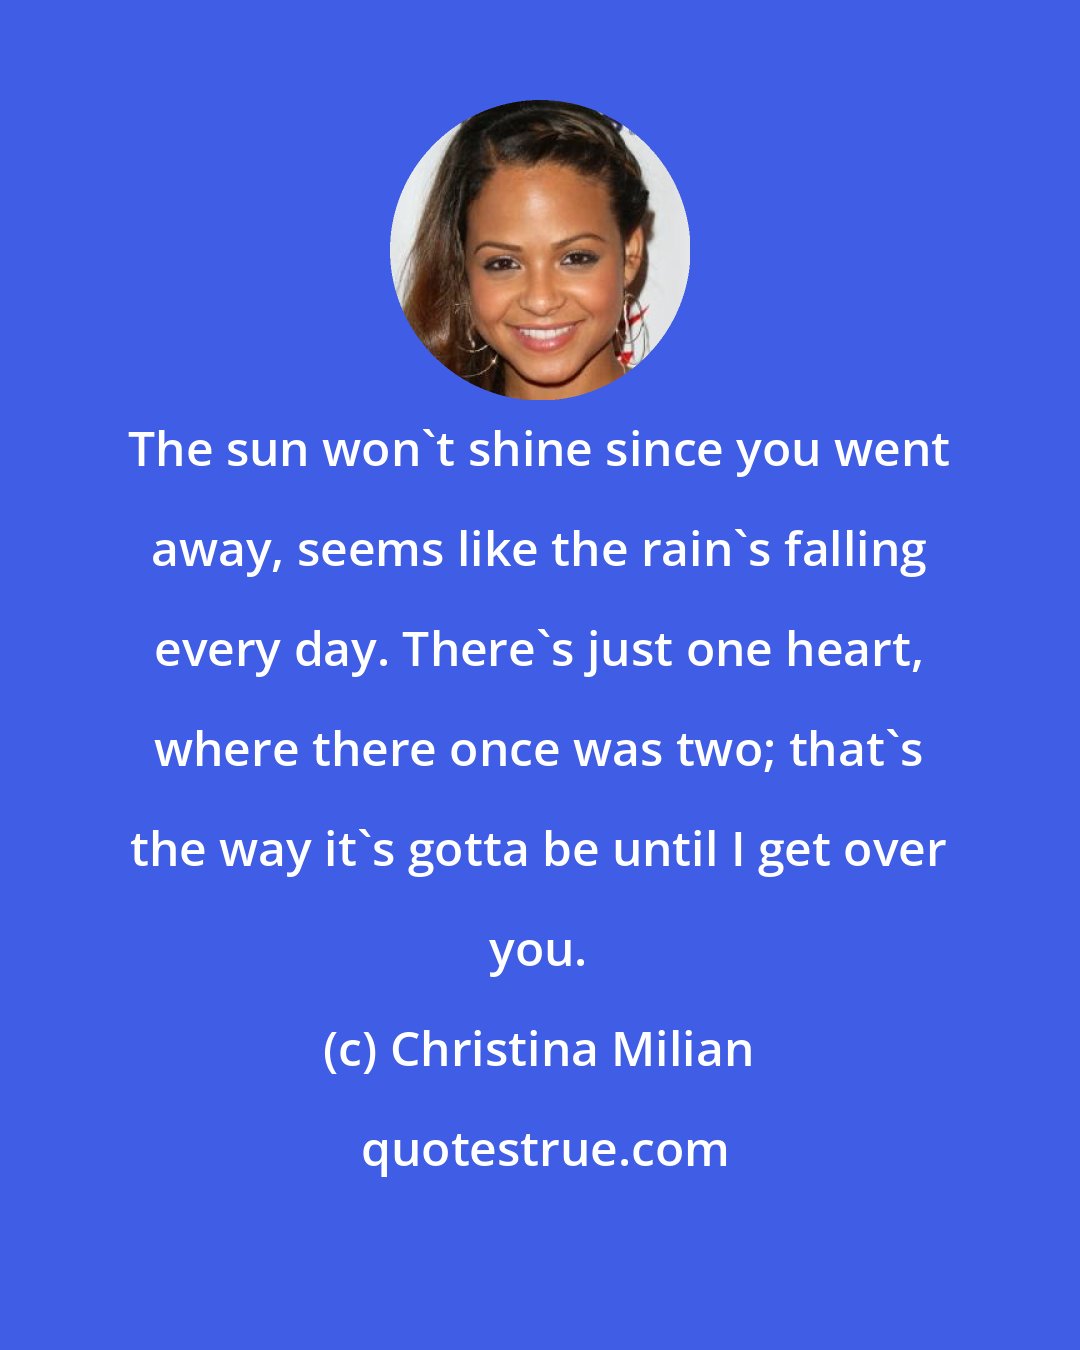 Christina Milian: The sun won't shine since you went away, seems like the rain's falling every day. There's just one heart, where there once was two; that's the way it's gotta be until I get over you.